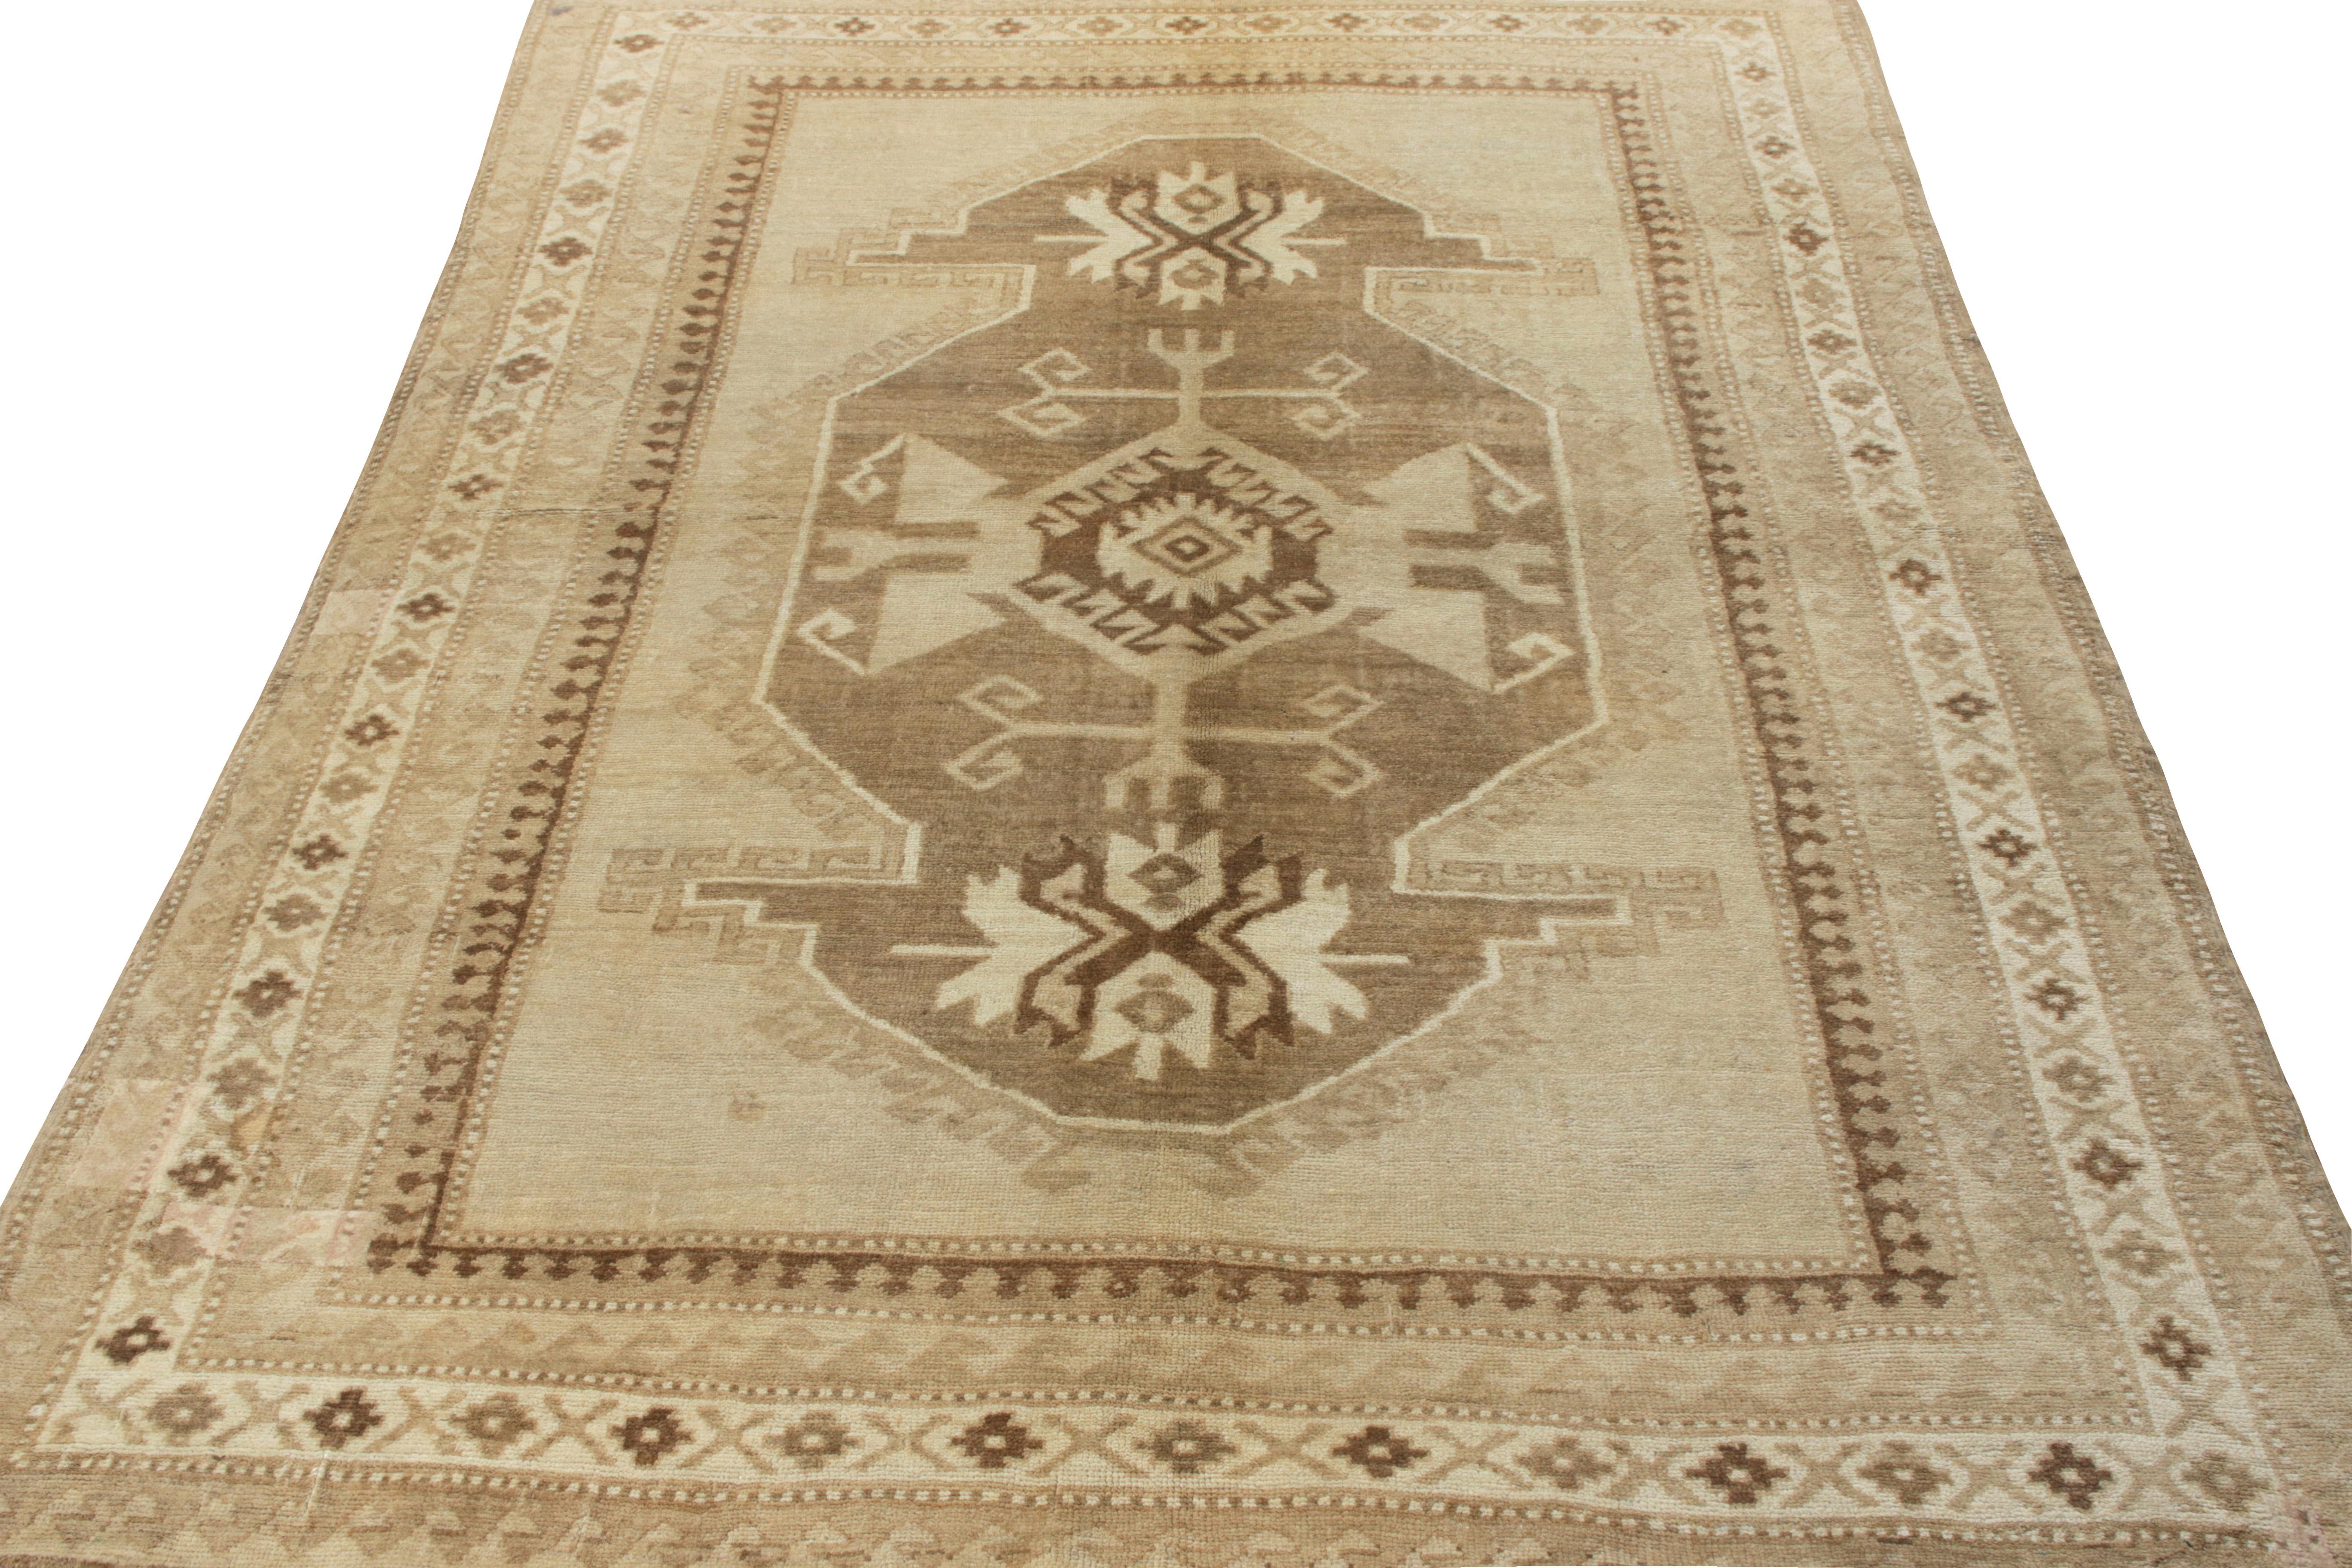 Hand-knotted in wool, a vintage mid-century Kars pile rug originating from Turkey circa 1950-1960. Joining Rug & Kilim’s coveted Antique & Vintage collection, this 7x9 piece exhibits a medallion pattern in tribal style emanating the richness of the